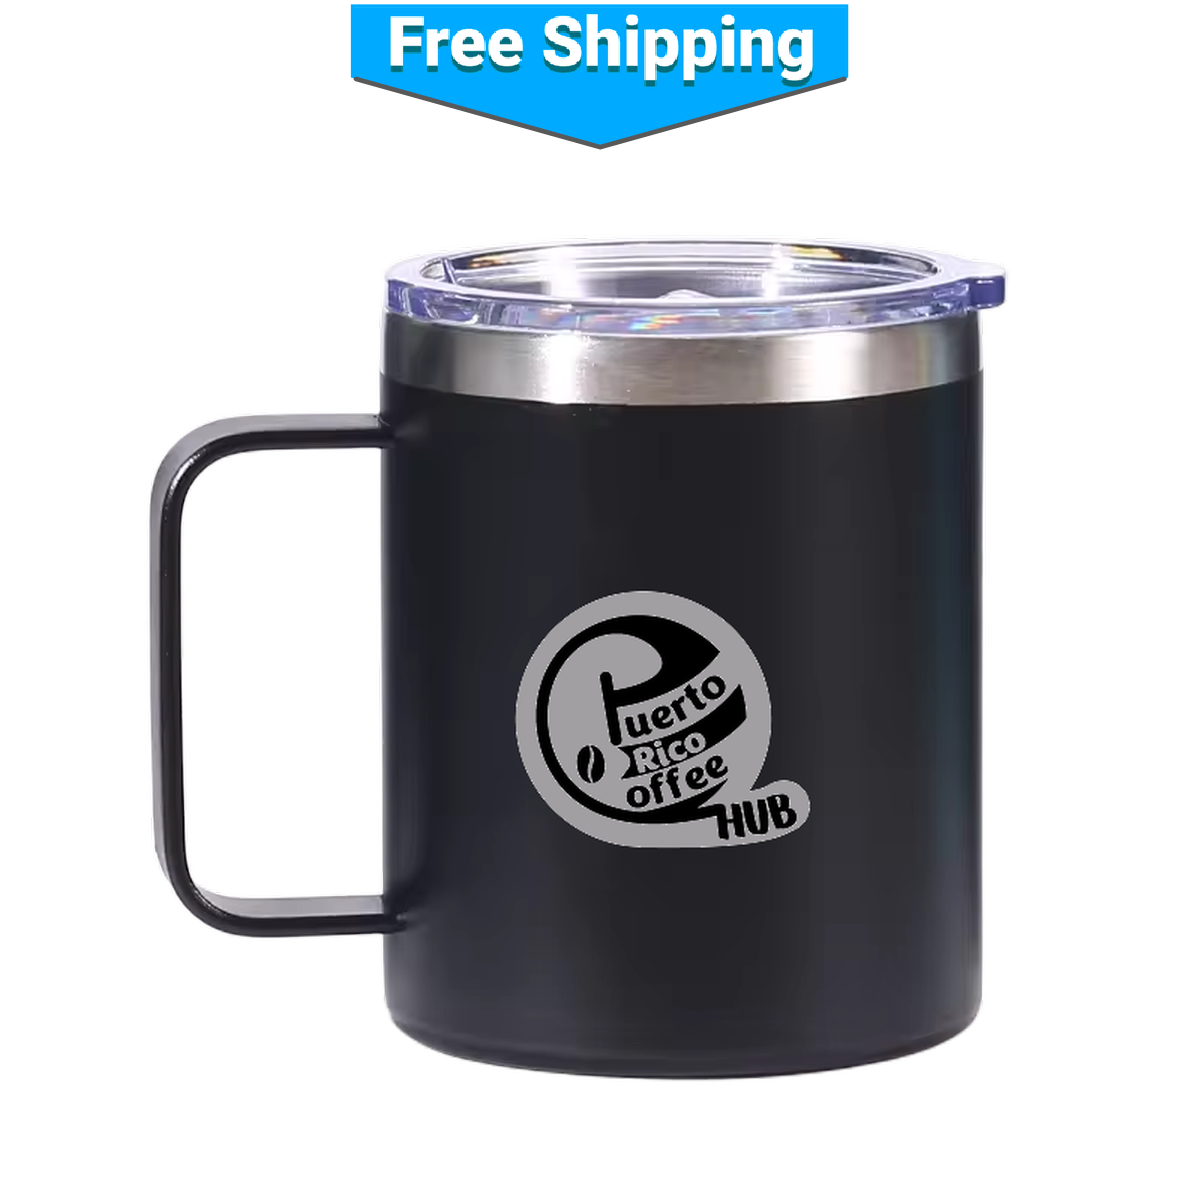 Double Insulated Stainless Steel Mug